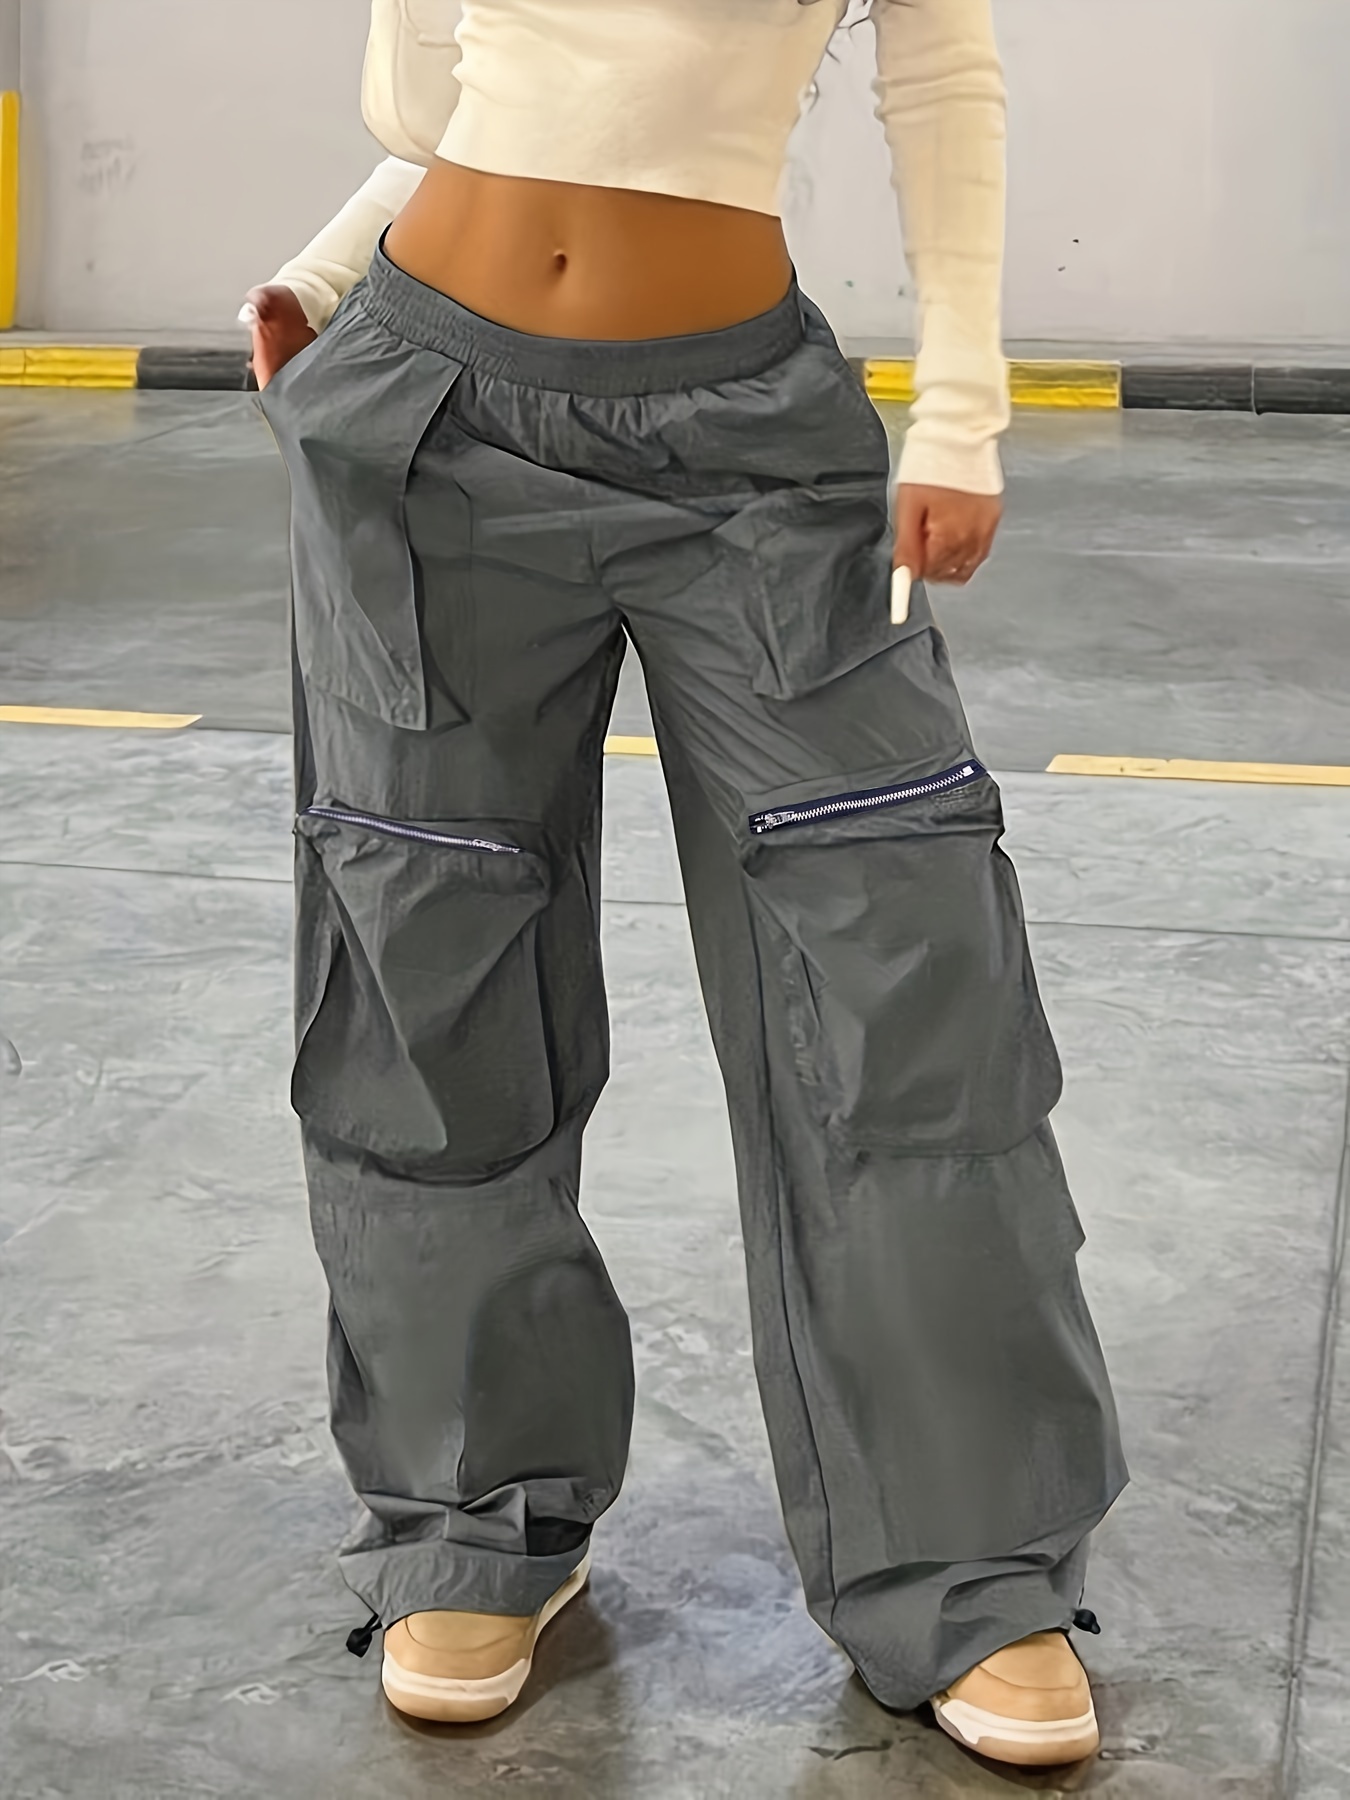 Solid Baggy Cargo Pants, Vintage Elastic Waist Hip-hop Pants With Pocket,  Women's Clothing